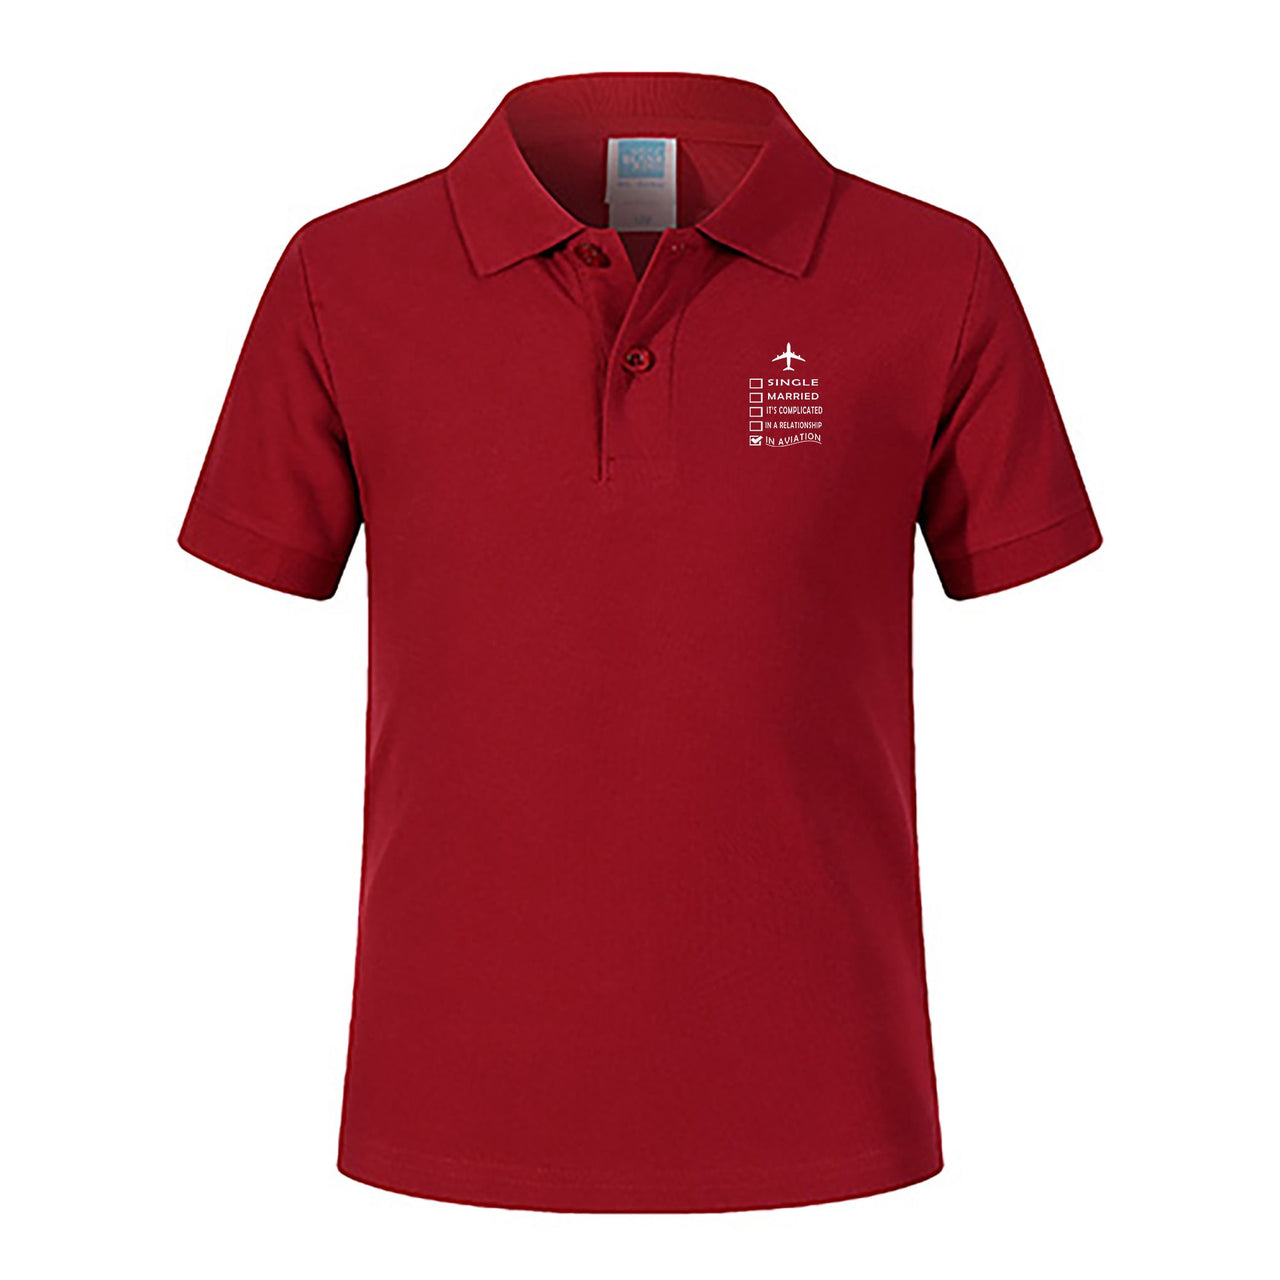 In Aviation Designed Children Polo T-Shirts